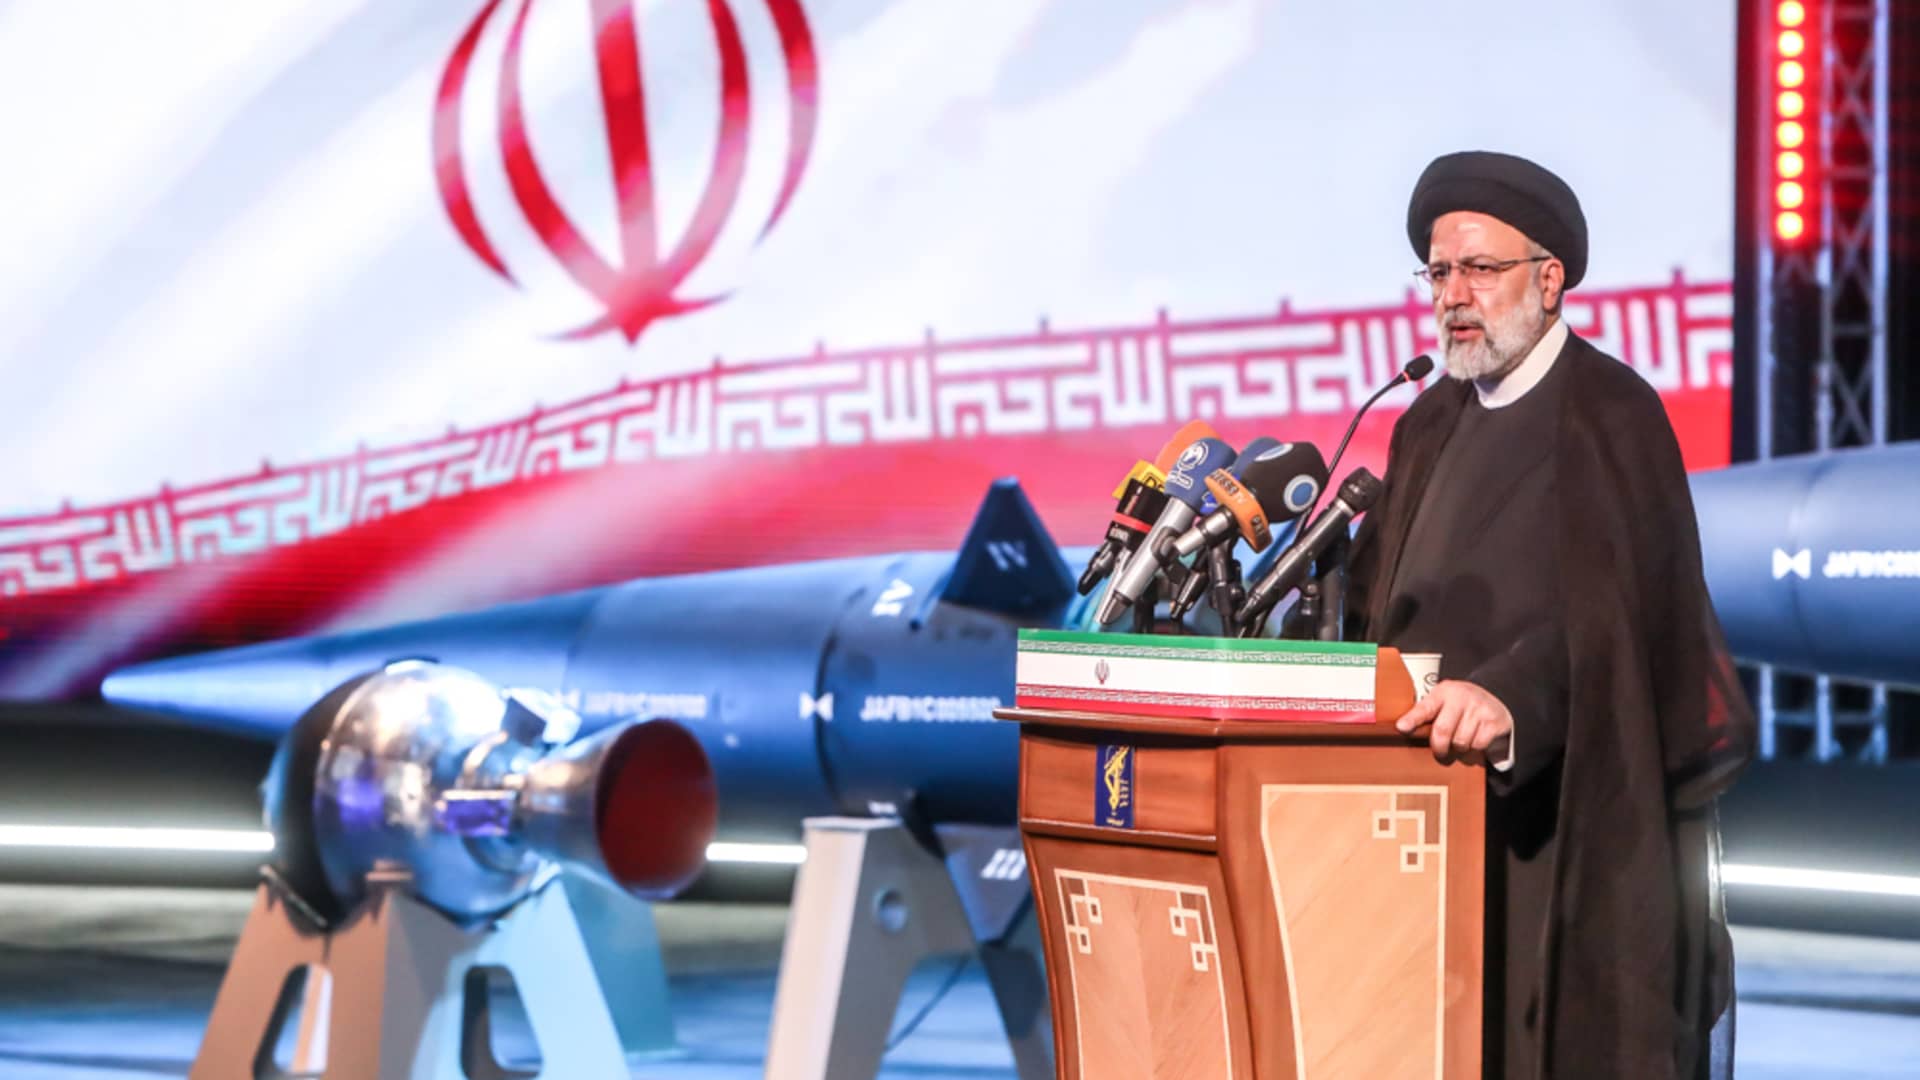 Iran presents its first hypersonic ballistic missile 'Fattah' (Conqueror) in an event attended by President Ebrahim Raisi and other government officials in Tehran, Iran on June 06, 2023.